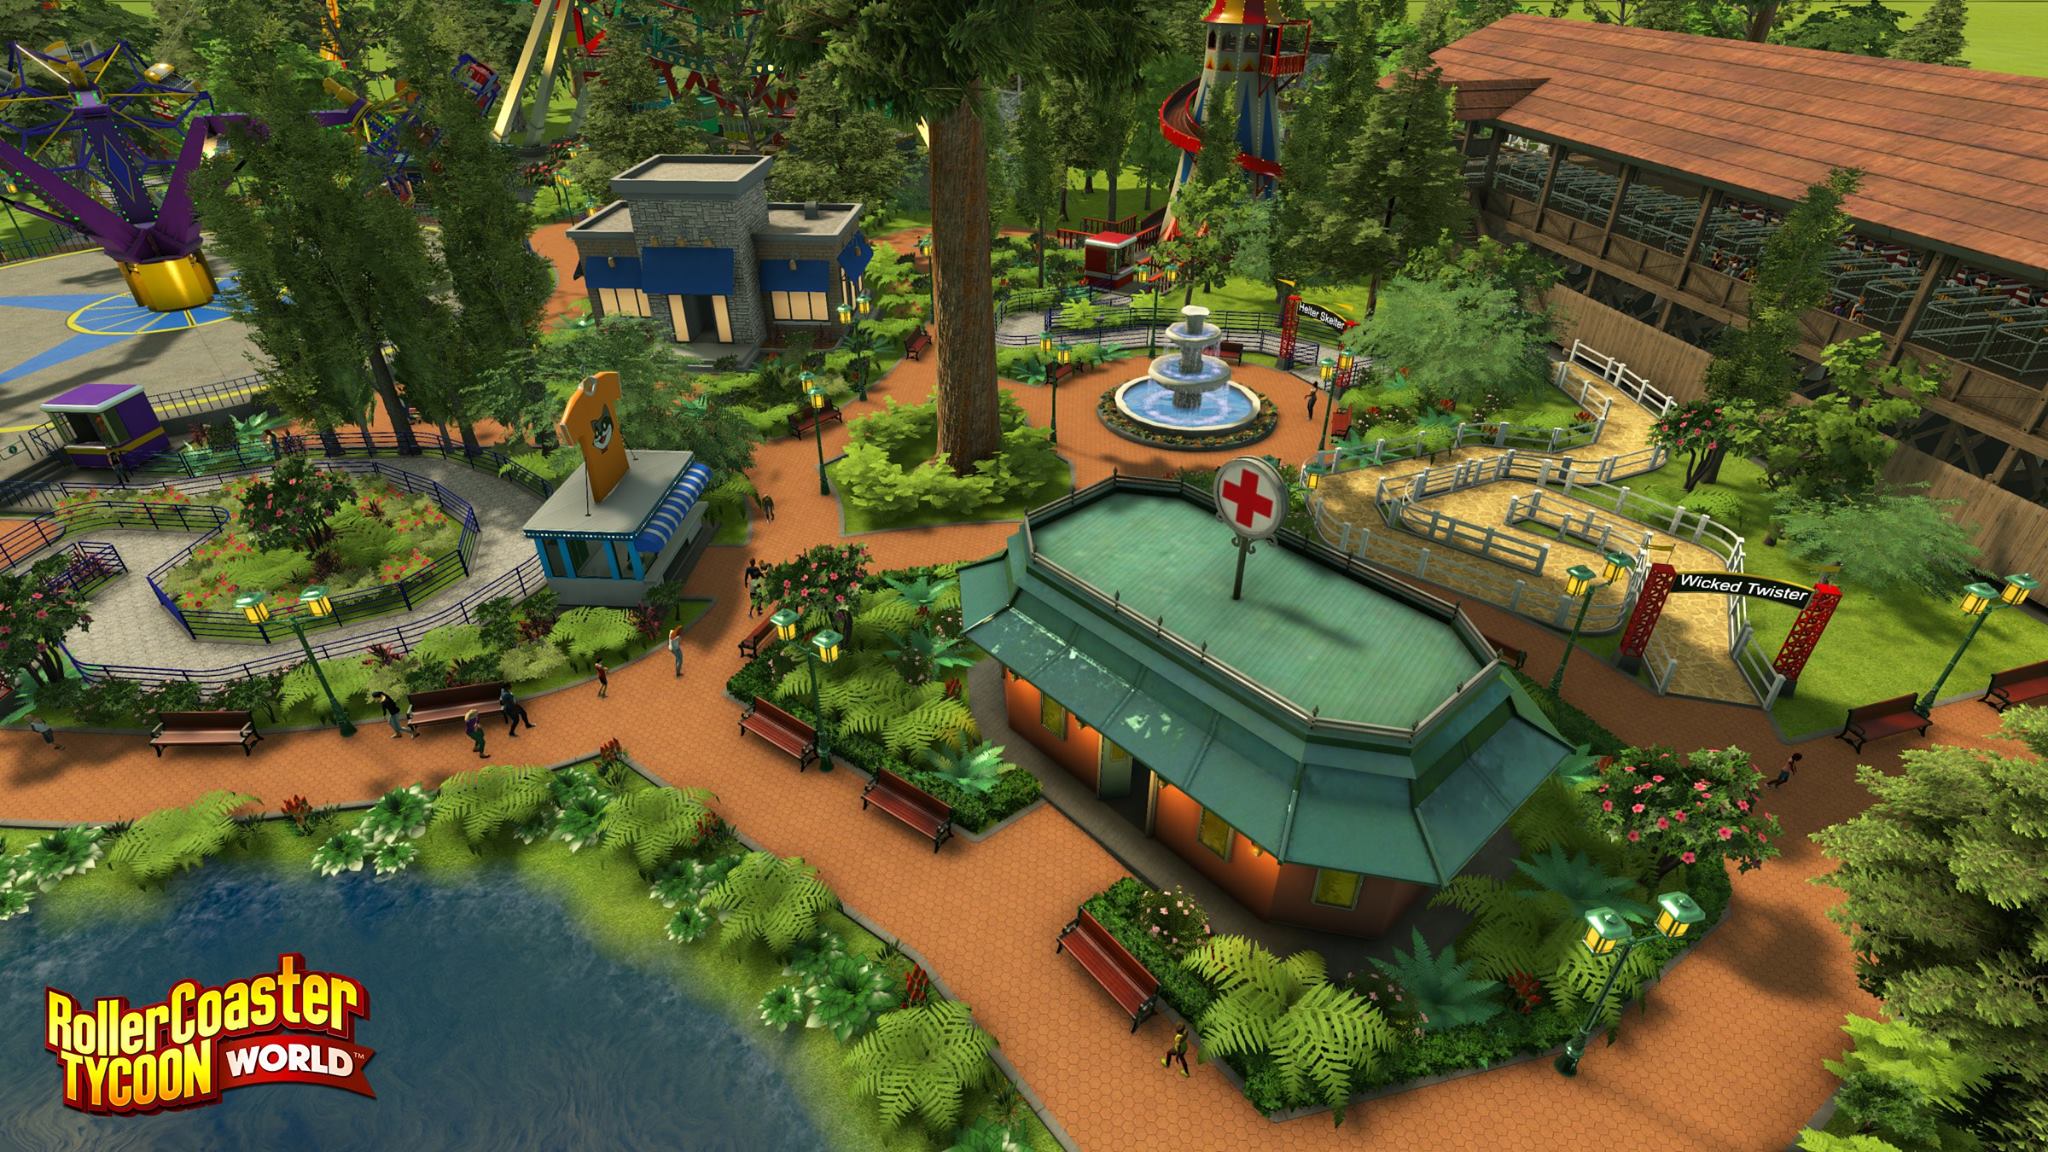 wild new world zoo tycoon 2 download